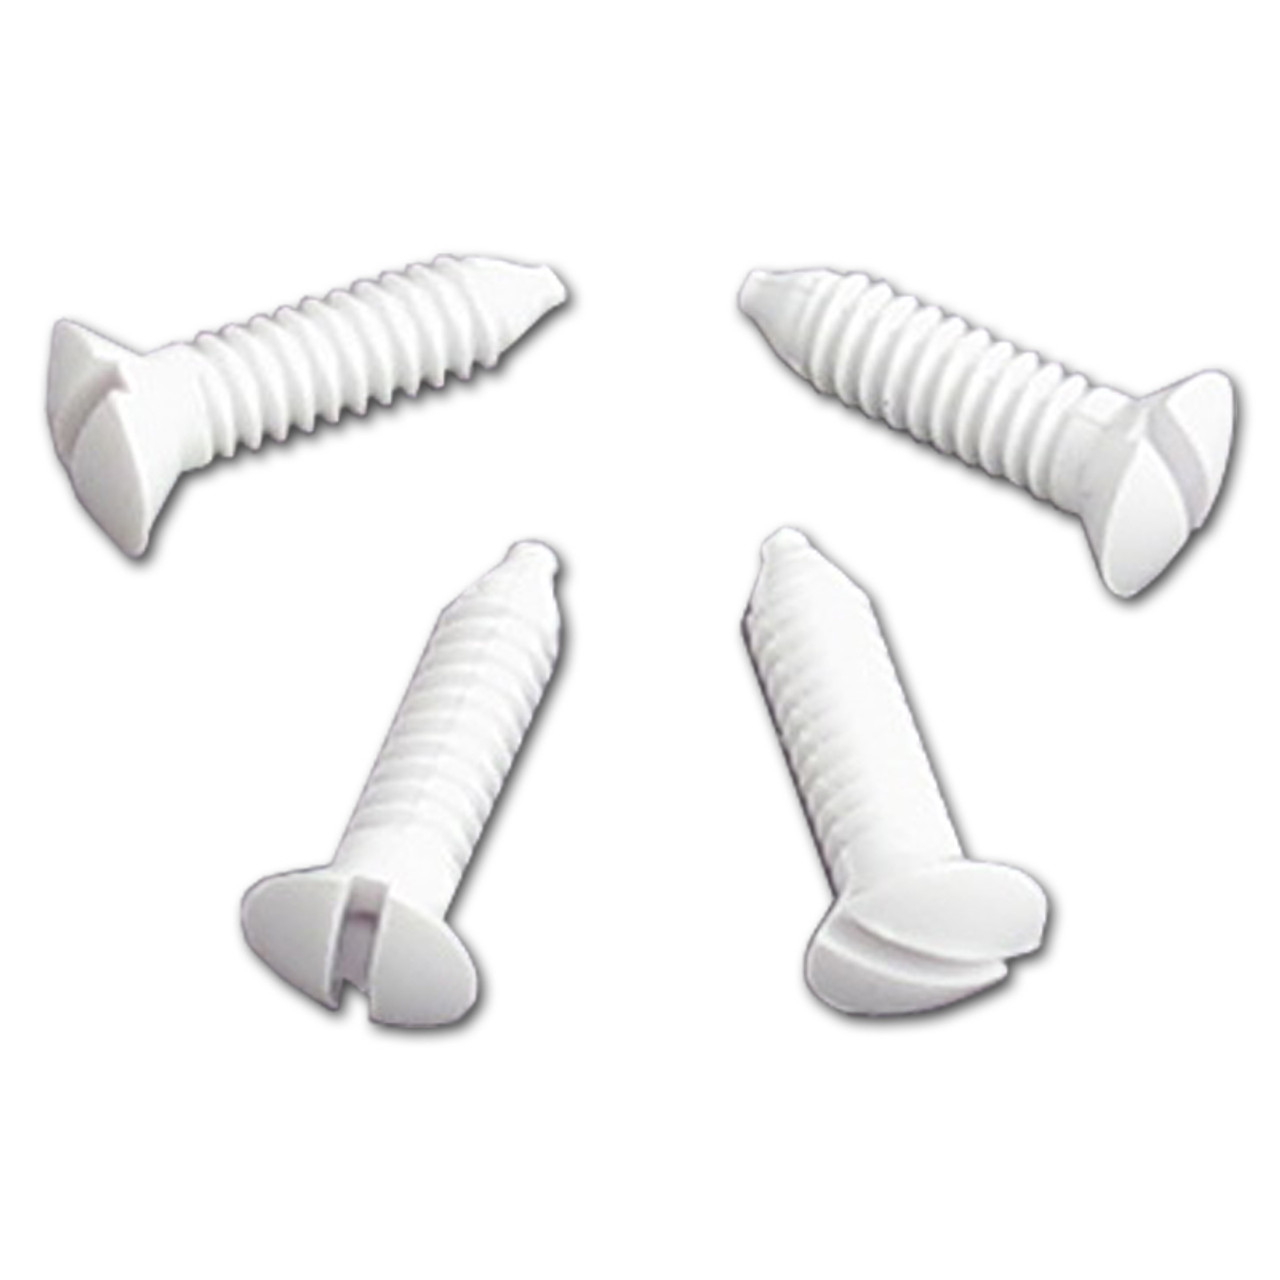 White Plastic Screws for Light Switch Wall Plates